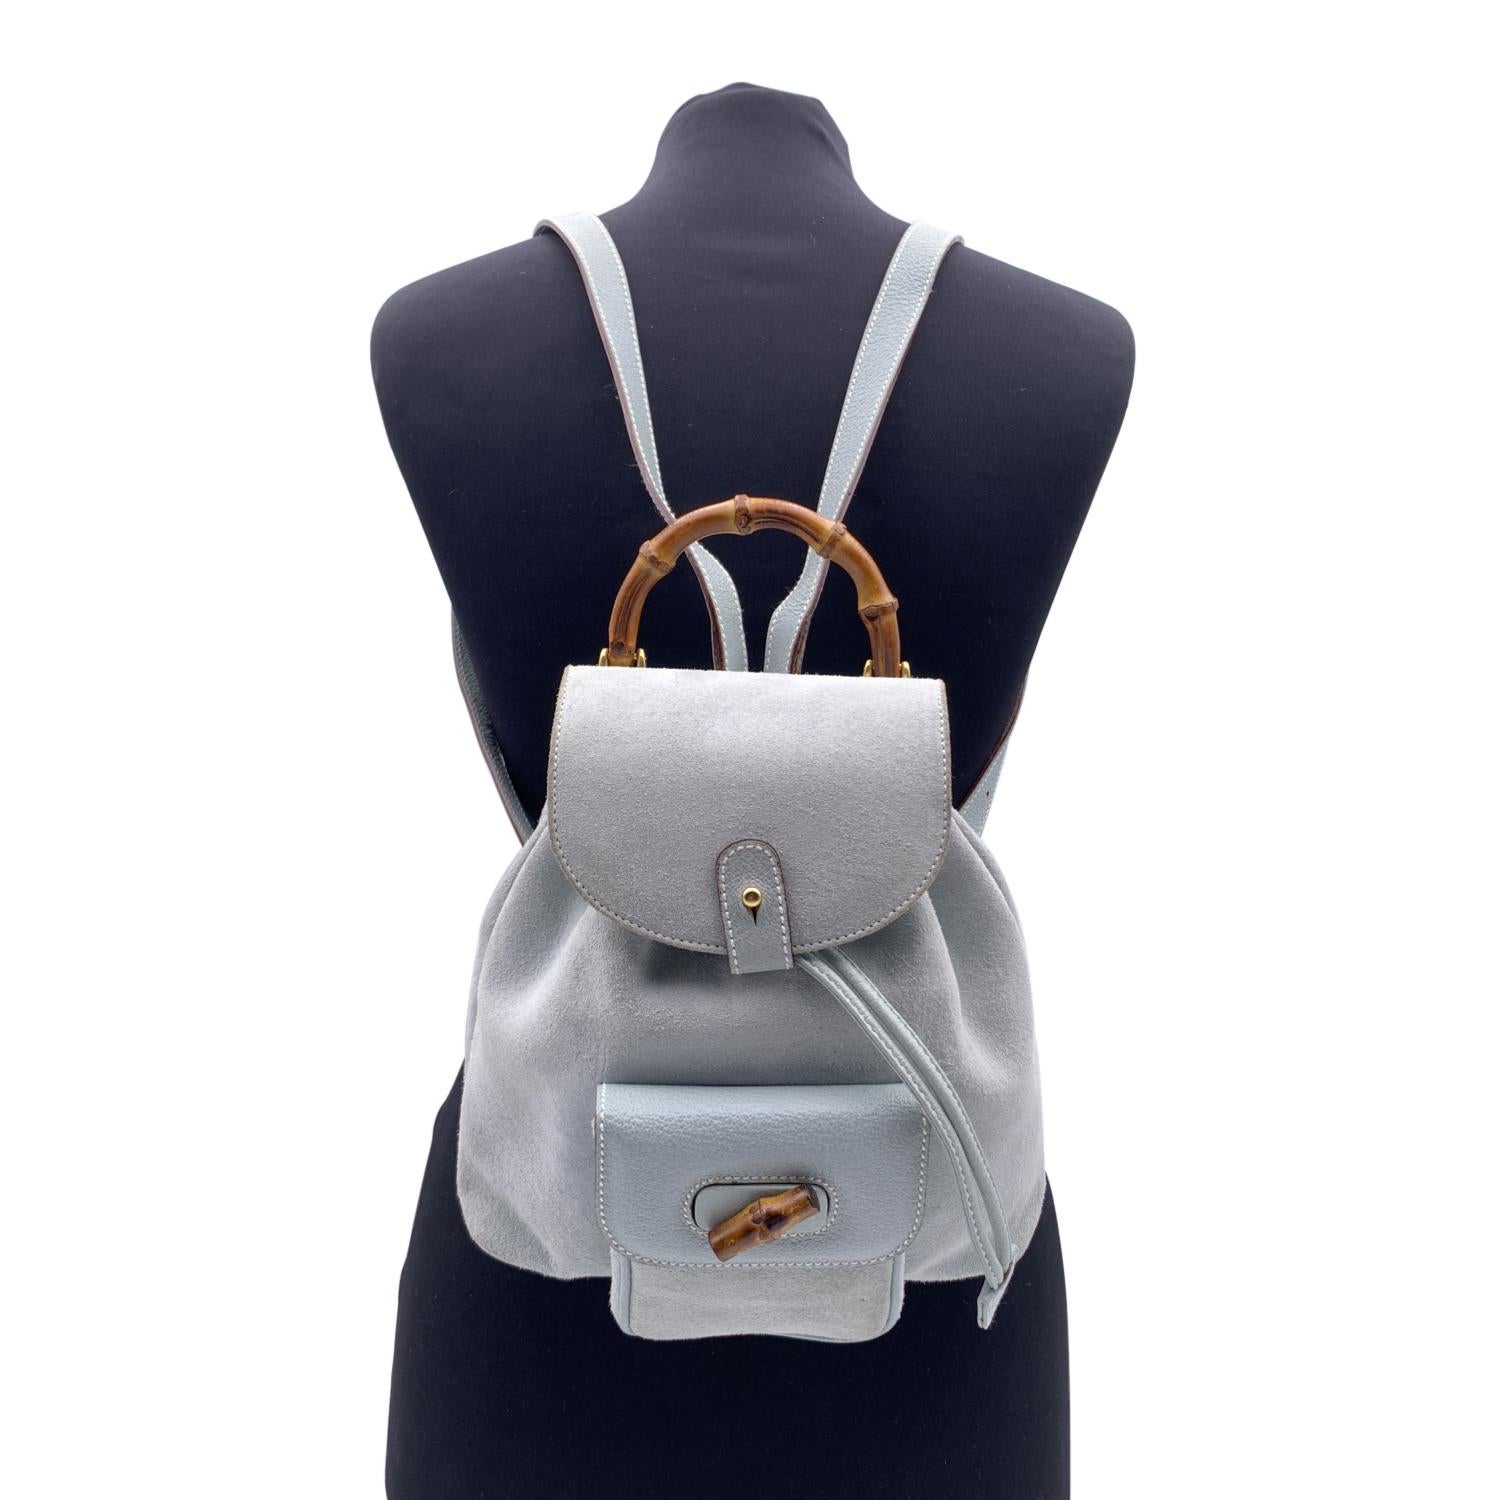 Vintage small backpack by Gucci, crafted in baby blue suede. It features Bamboo handle and and knob. 1 front pocket with twist lock closure. Flap closure and drawstring top opening. Gold metal hardware. Internal diamond lining. 1 side zip pocket